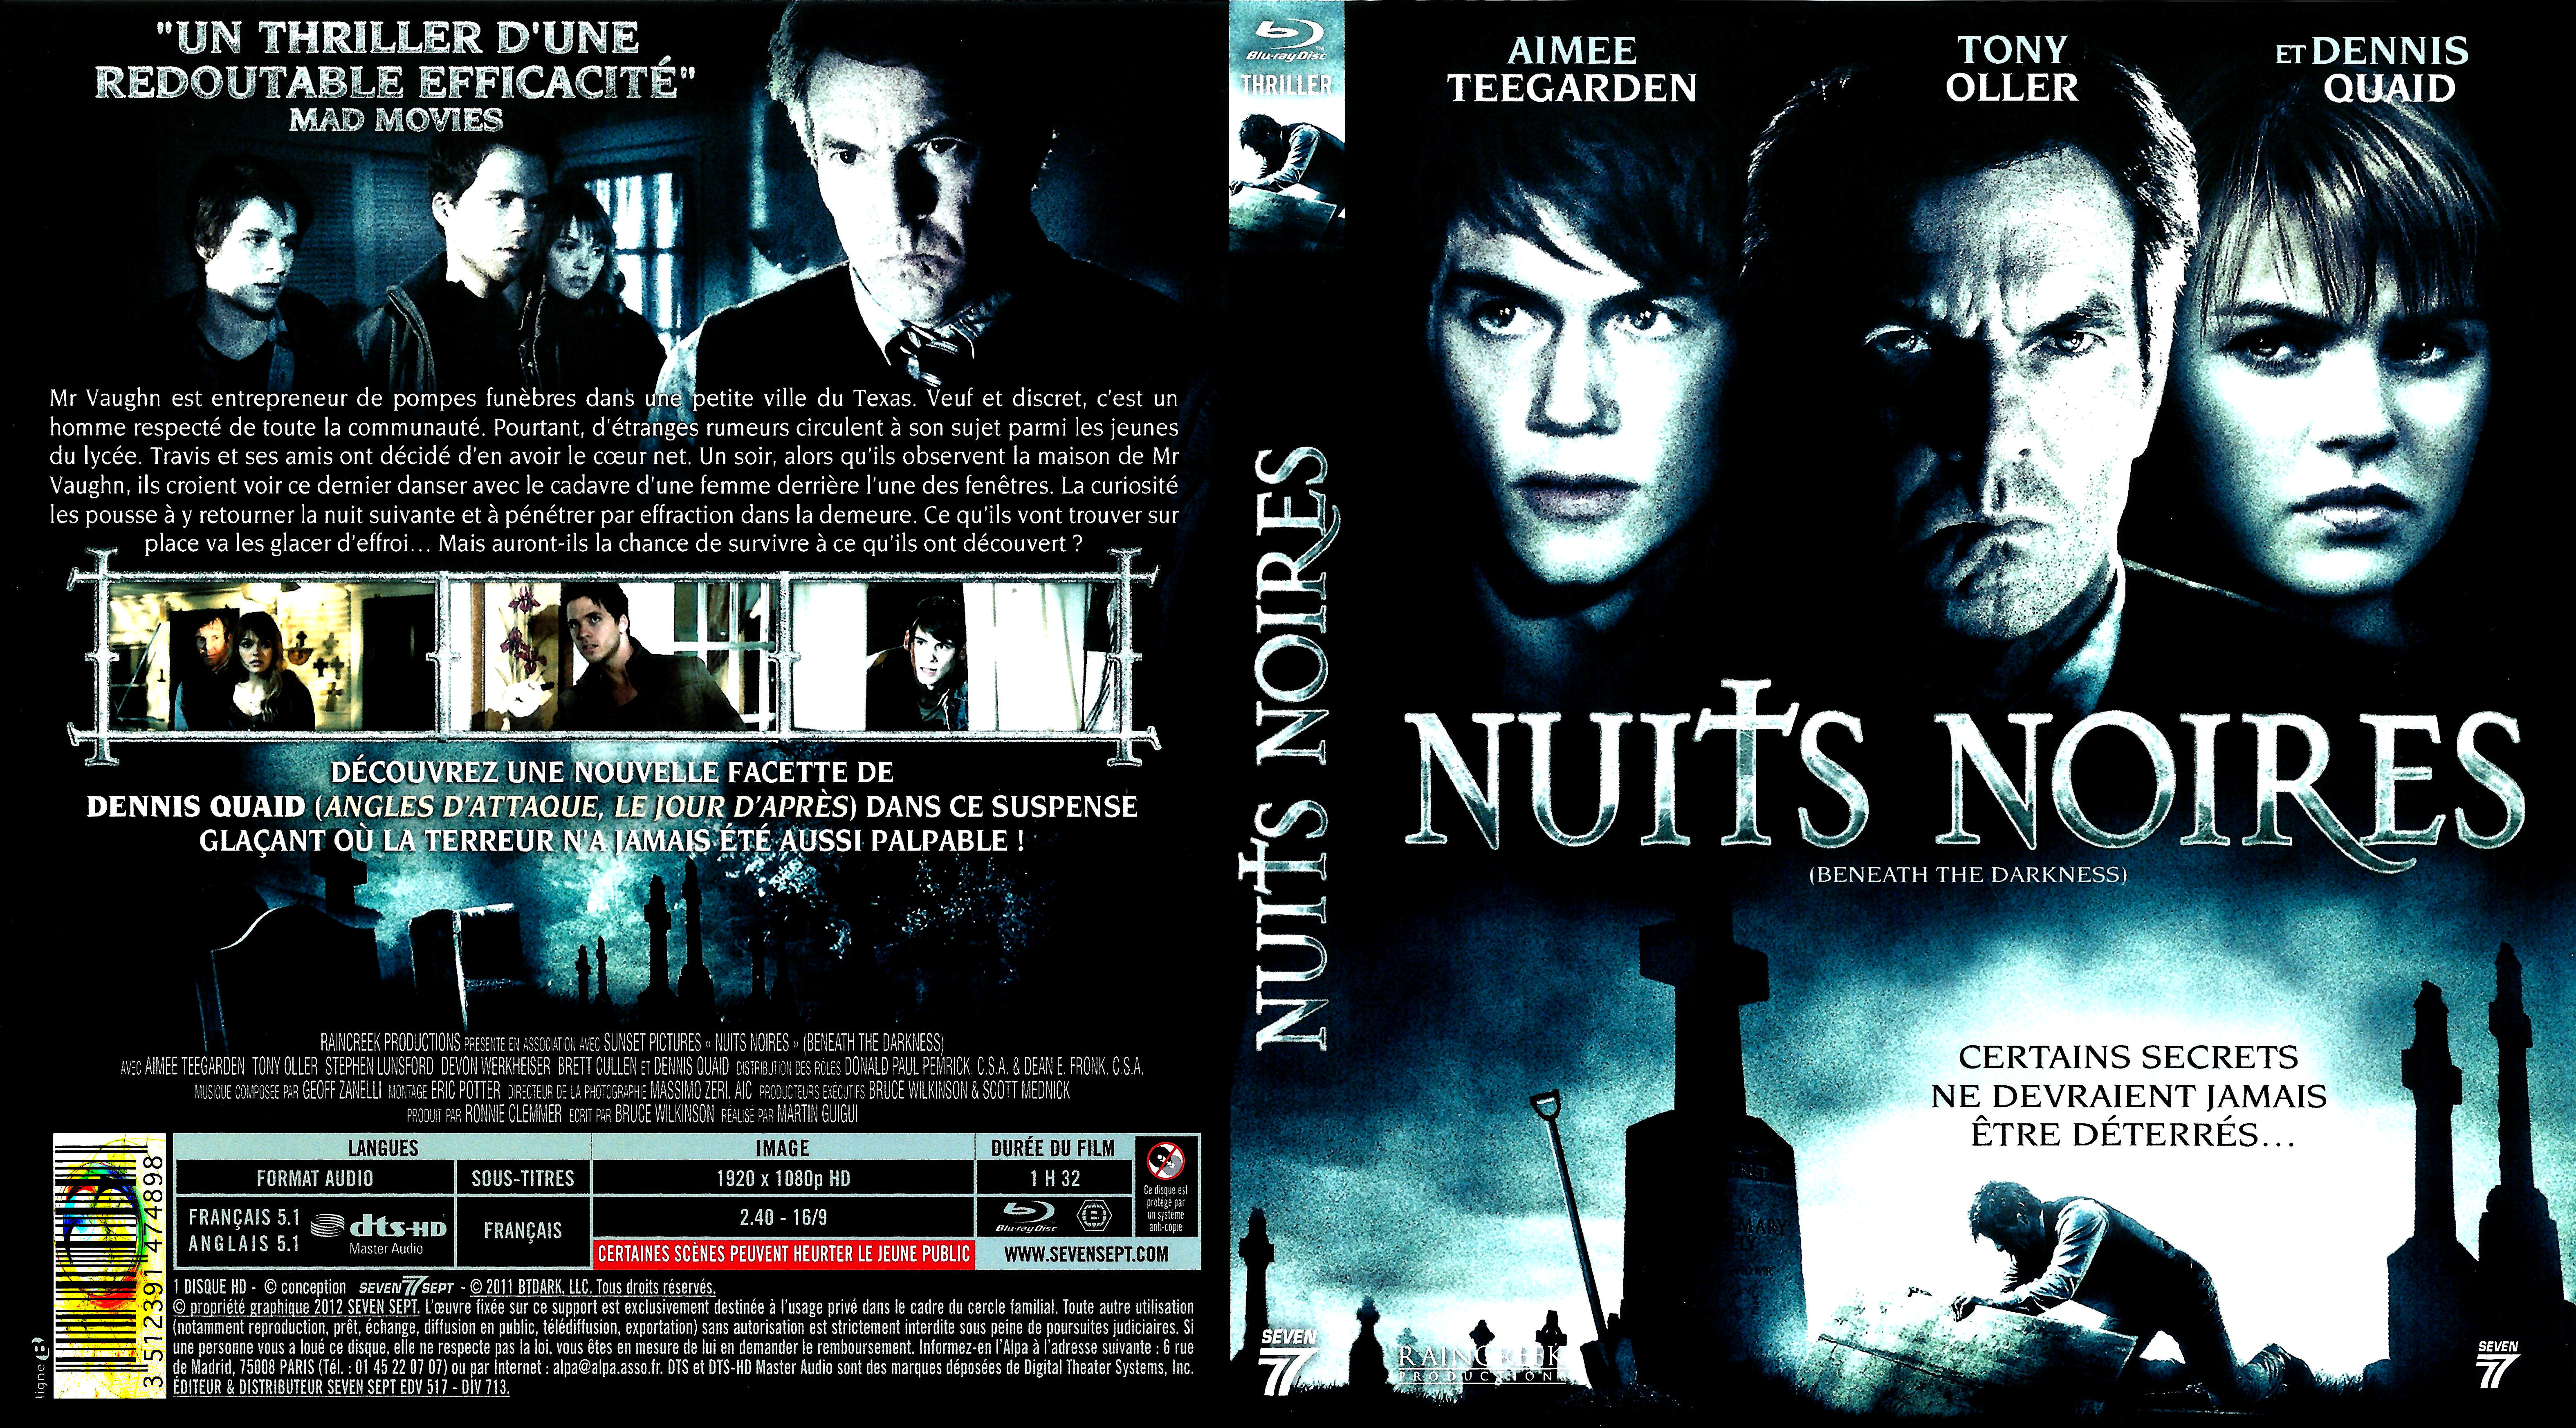 Jaquette DVD Nuits noires (BLU-RAY)